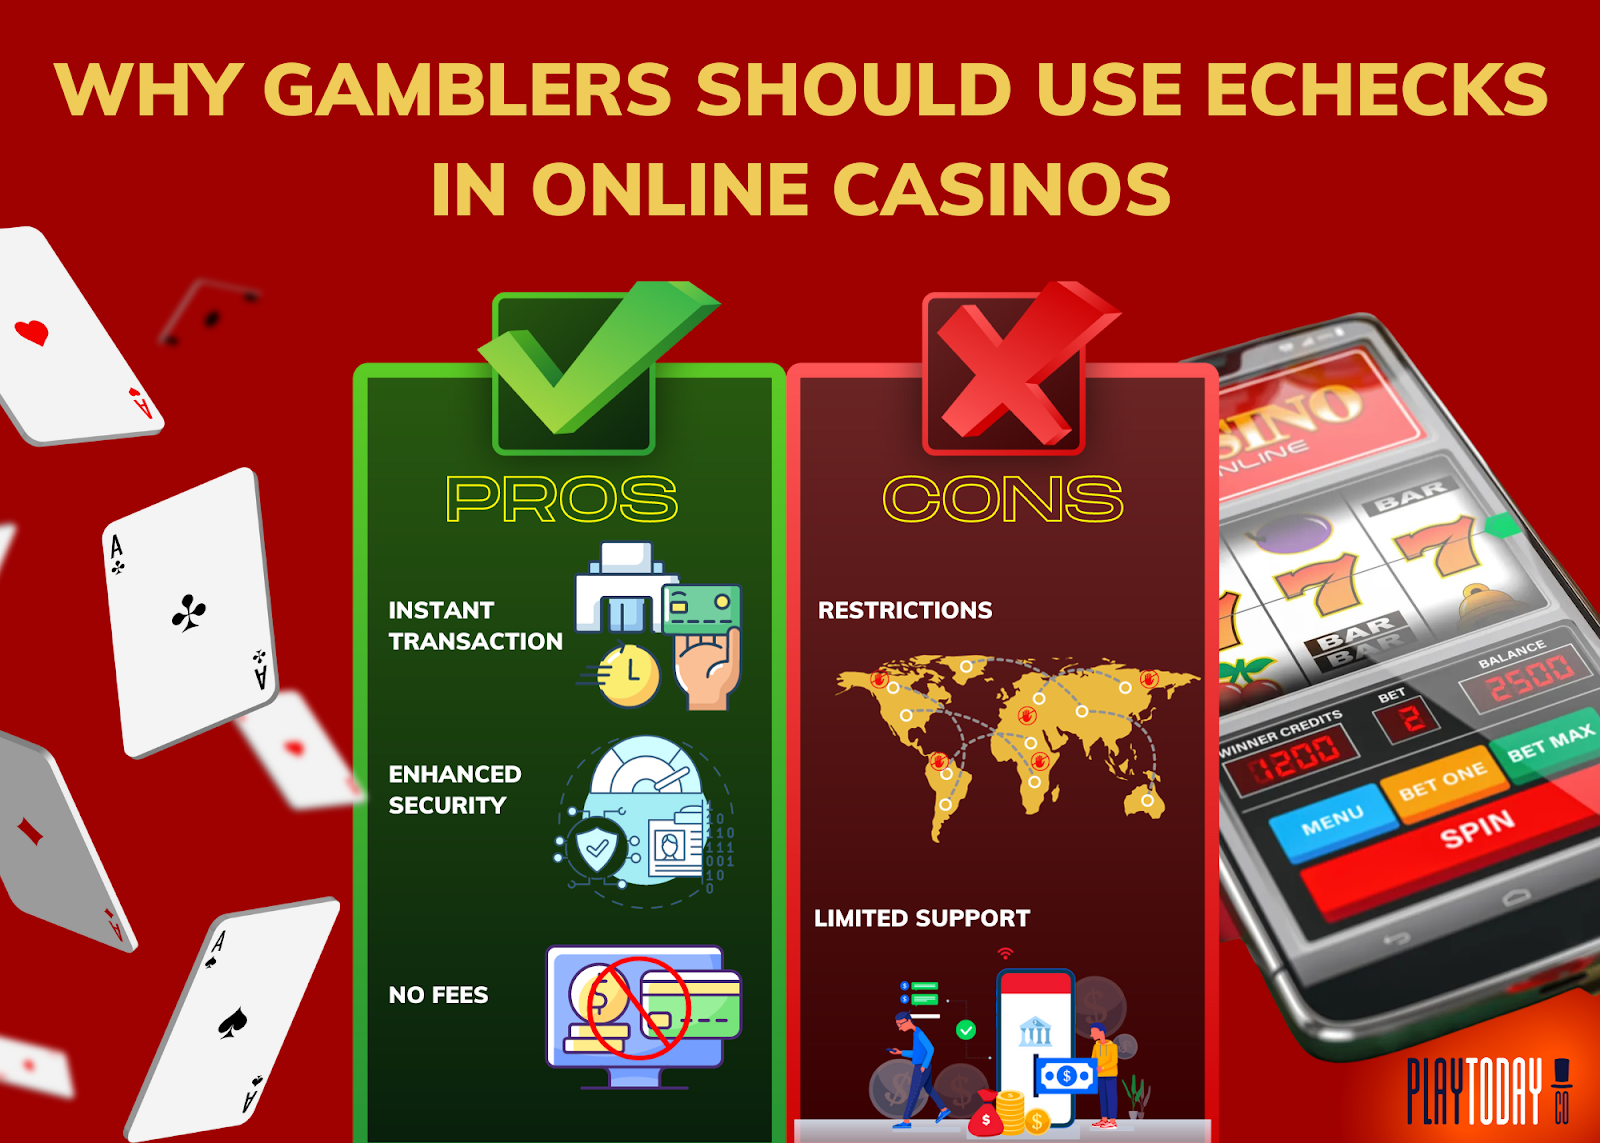 eChecks in Online Casinos Pros and Cons